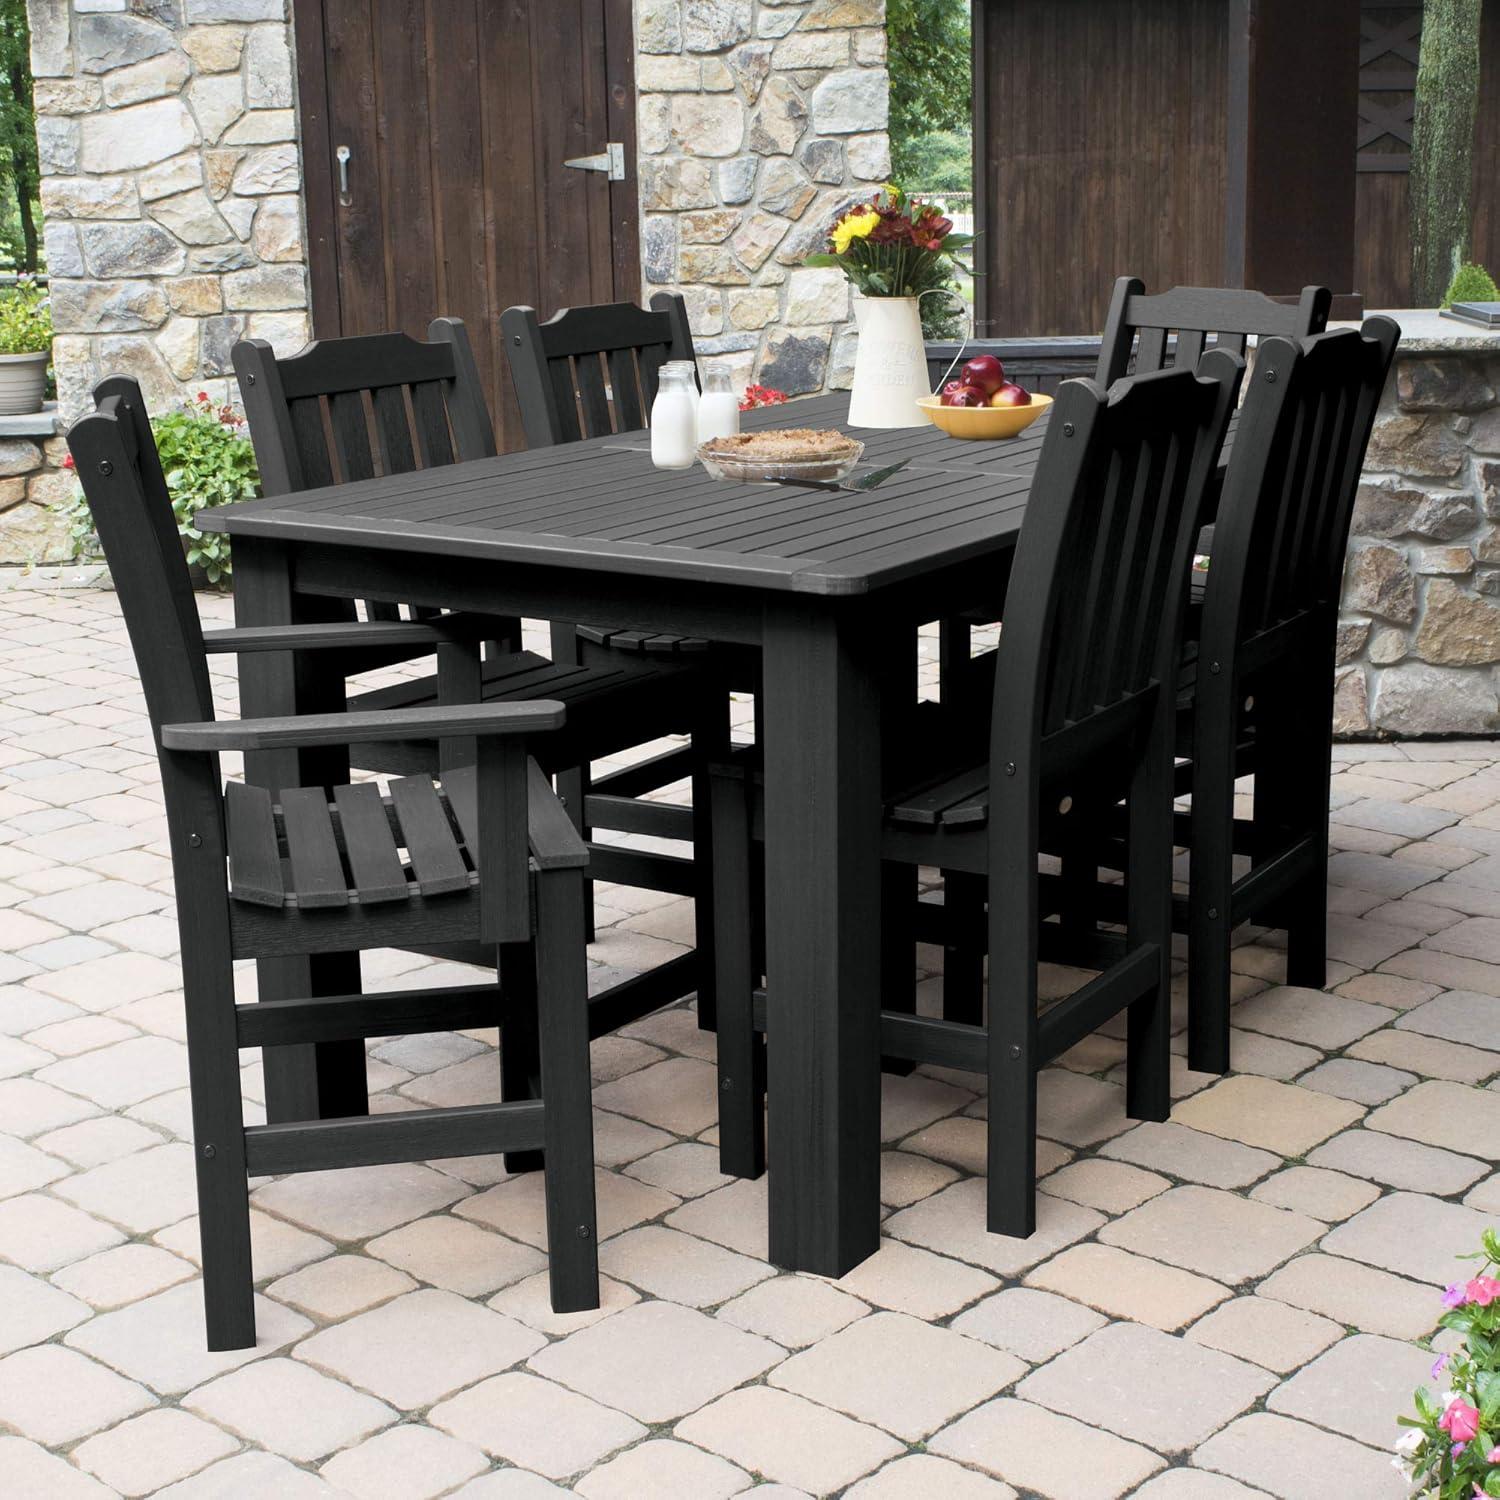 Lehigh Black Bamboo 7-Piece Outdoor Dining Set for 6